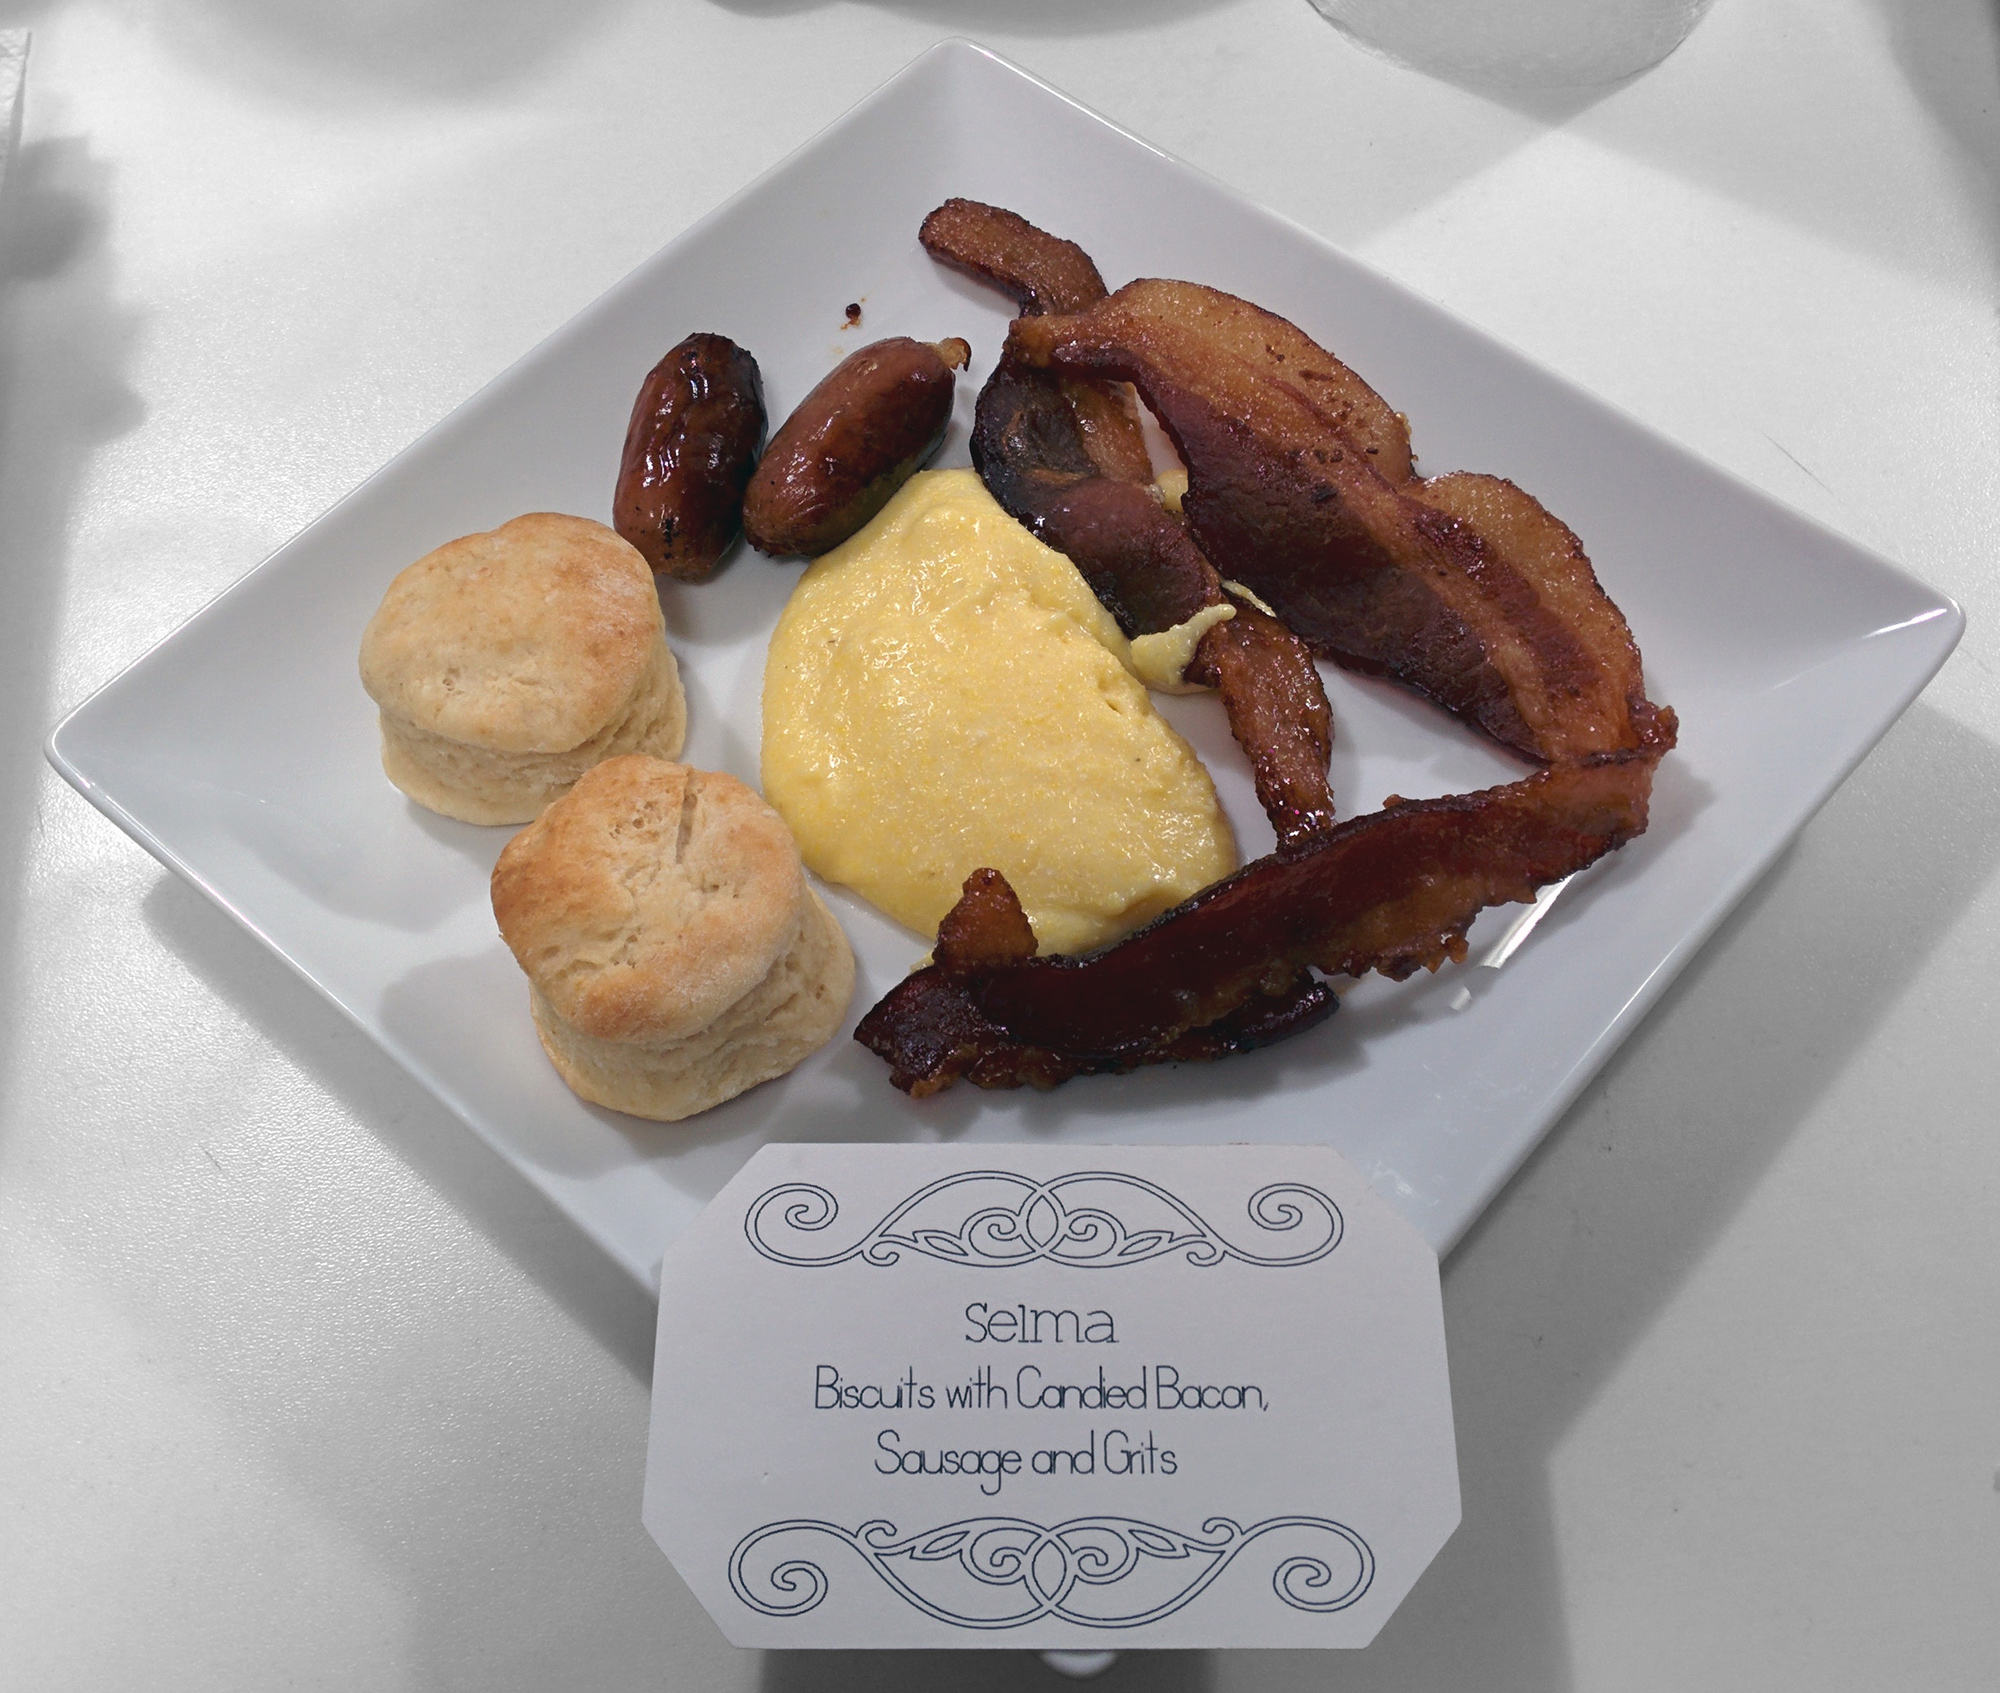 Selma: Biscuits with candied bacon, sausage, and grits